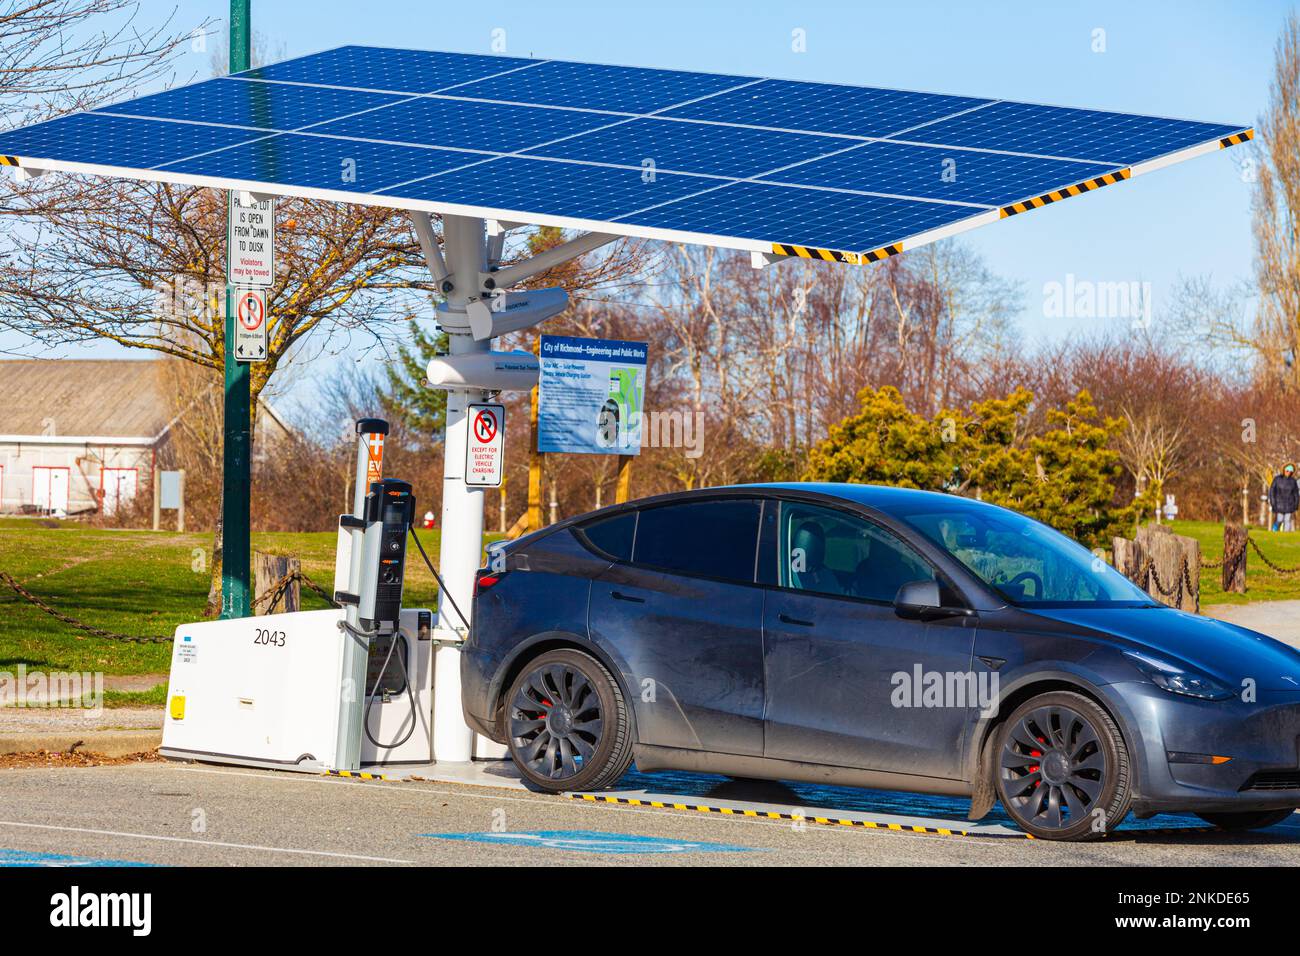 An electric car recharging at a solar powered electrical station in Steveston British Columbia Stock Photo